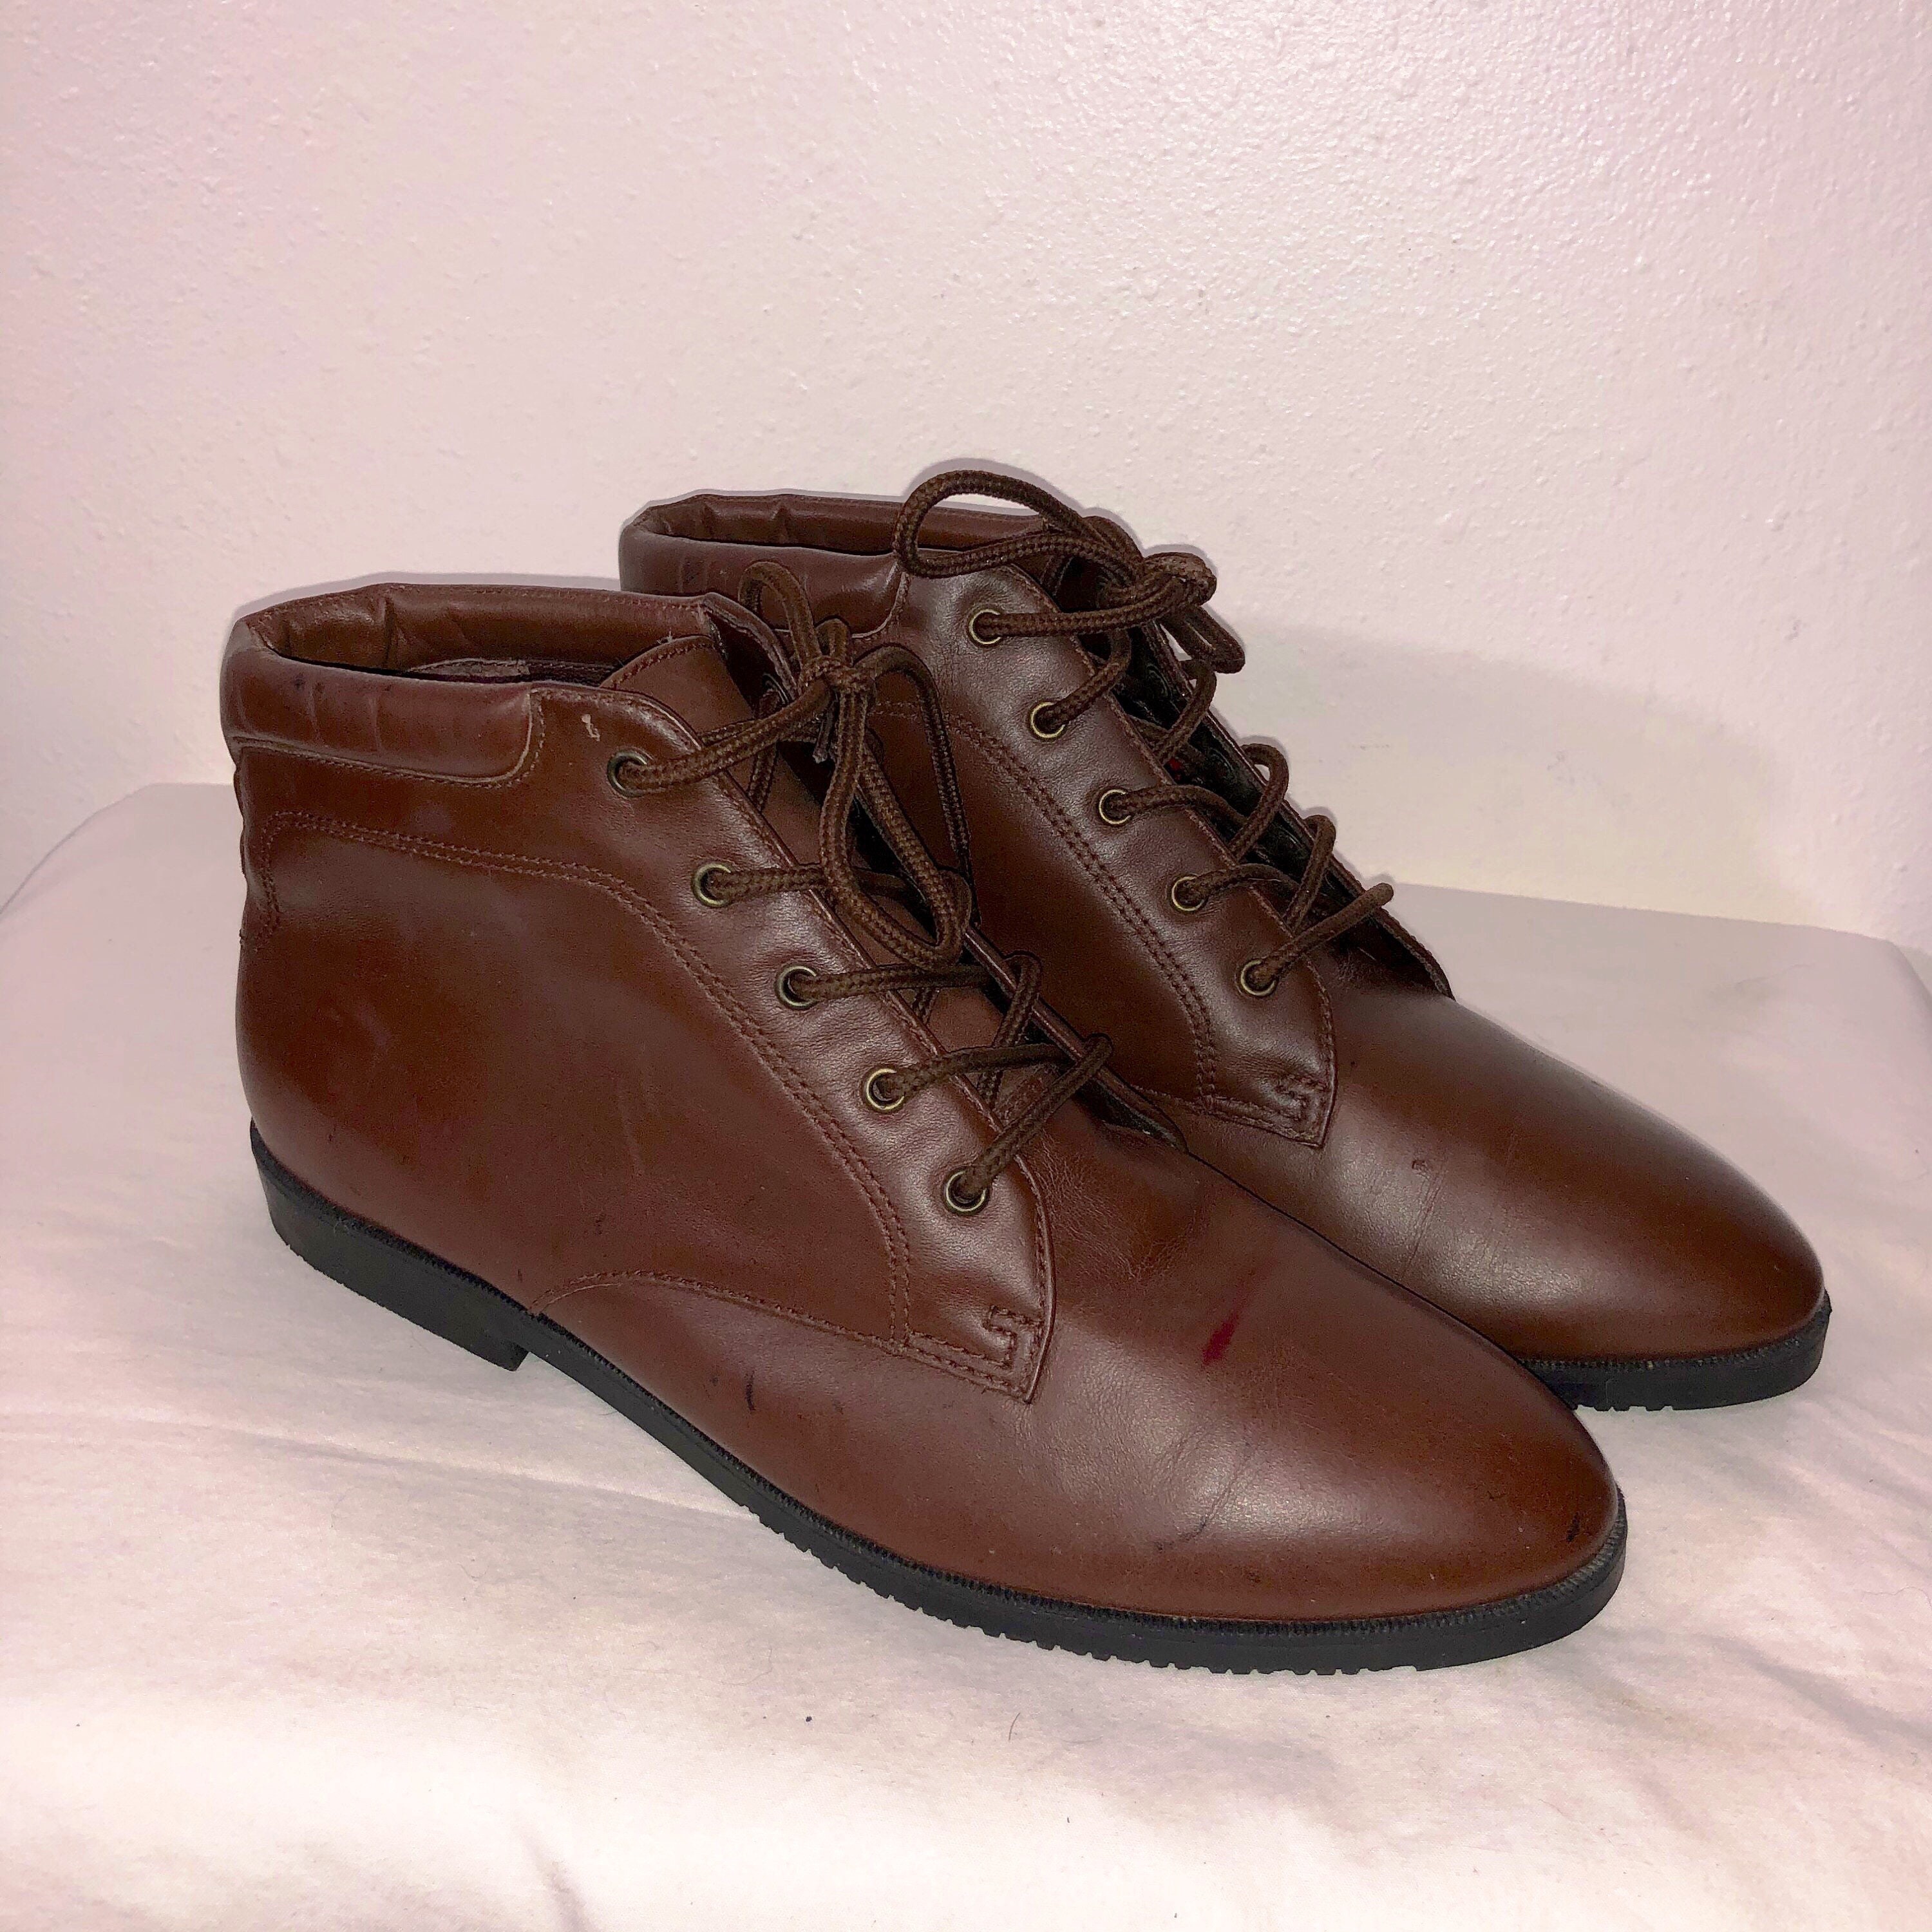 Danexx Brown Leather Laces Ankle Comfort Shoes Bootie Size 7 M